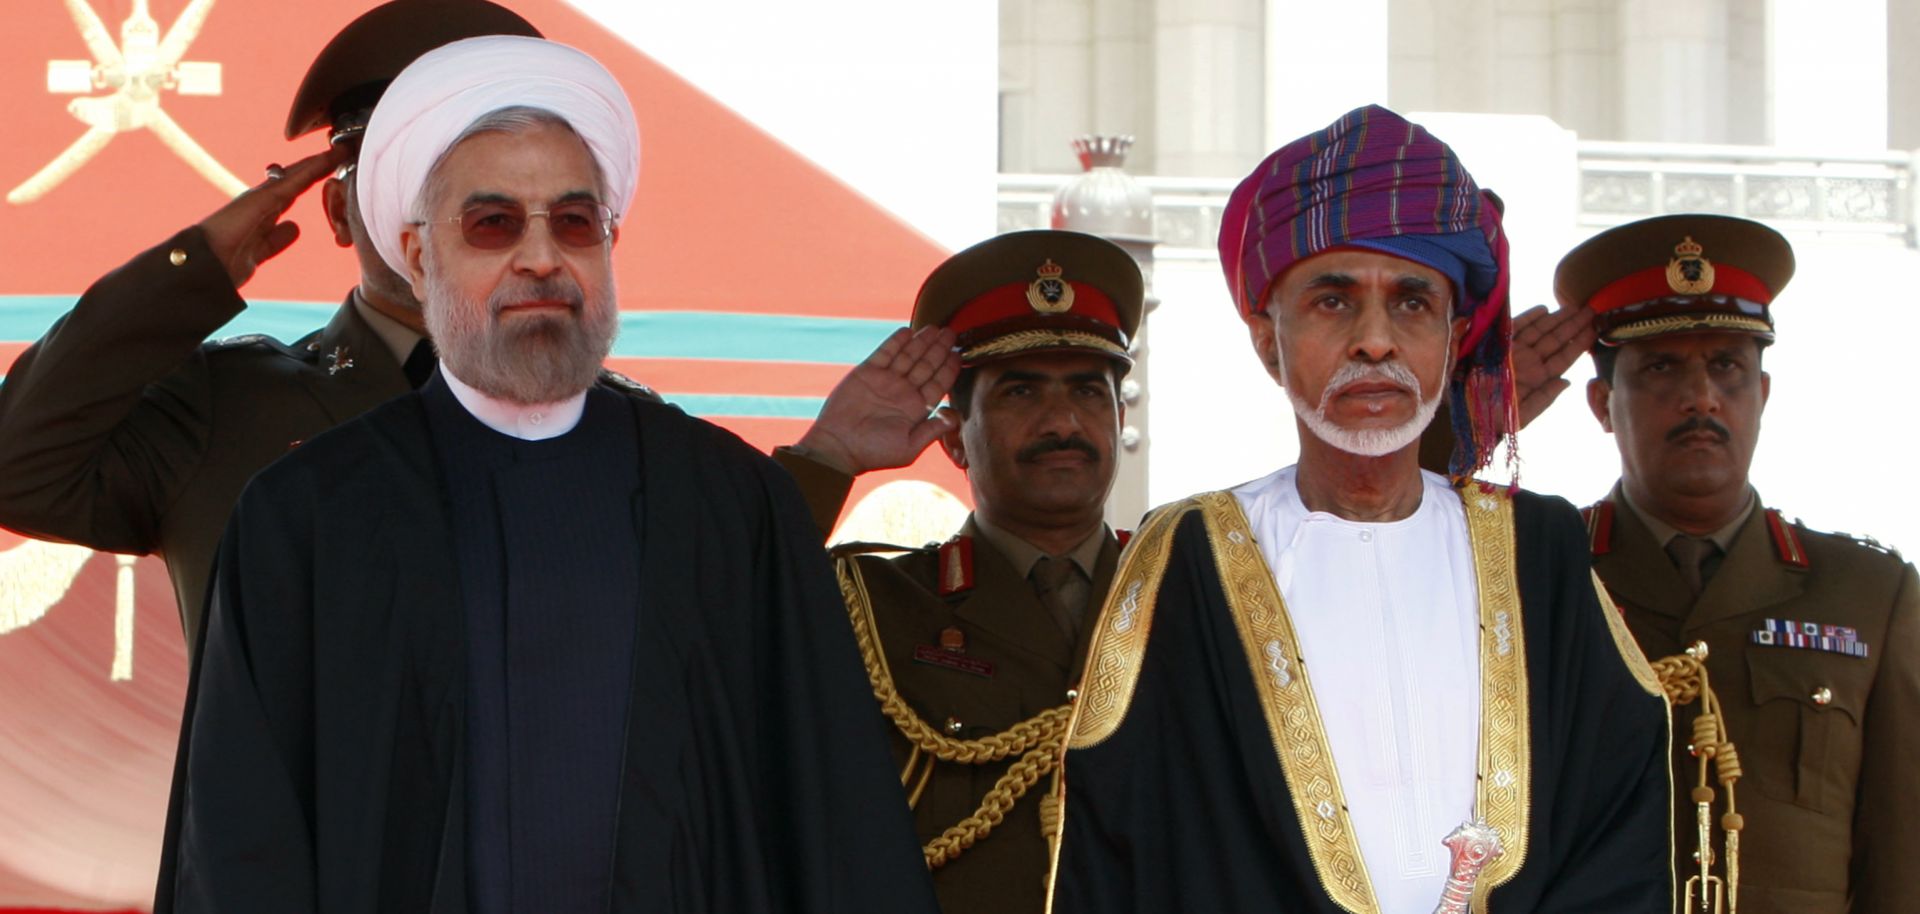 Omani leader Sultan Qaboos bin Said (R) and Iranian President Hassan Rouhani (L) in Muscat on March 12.